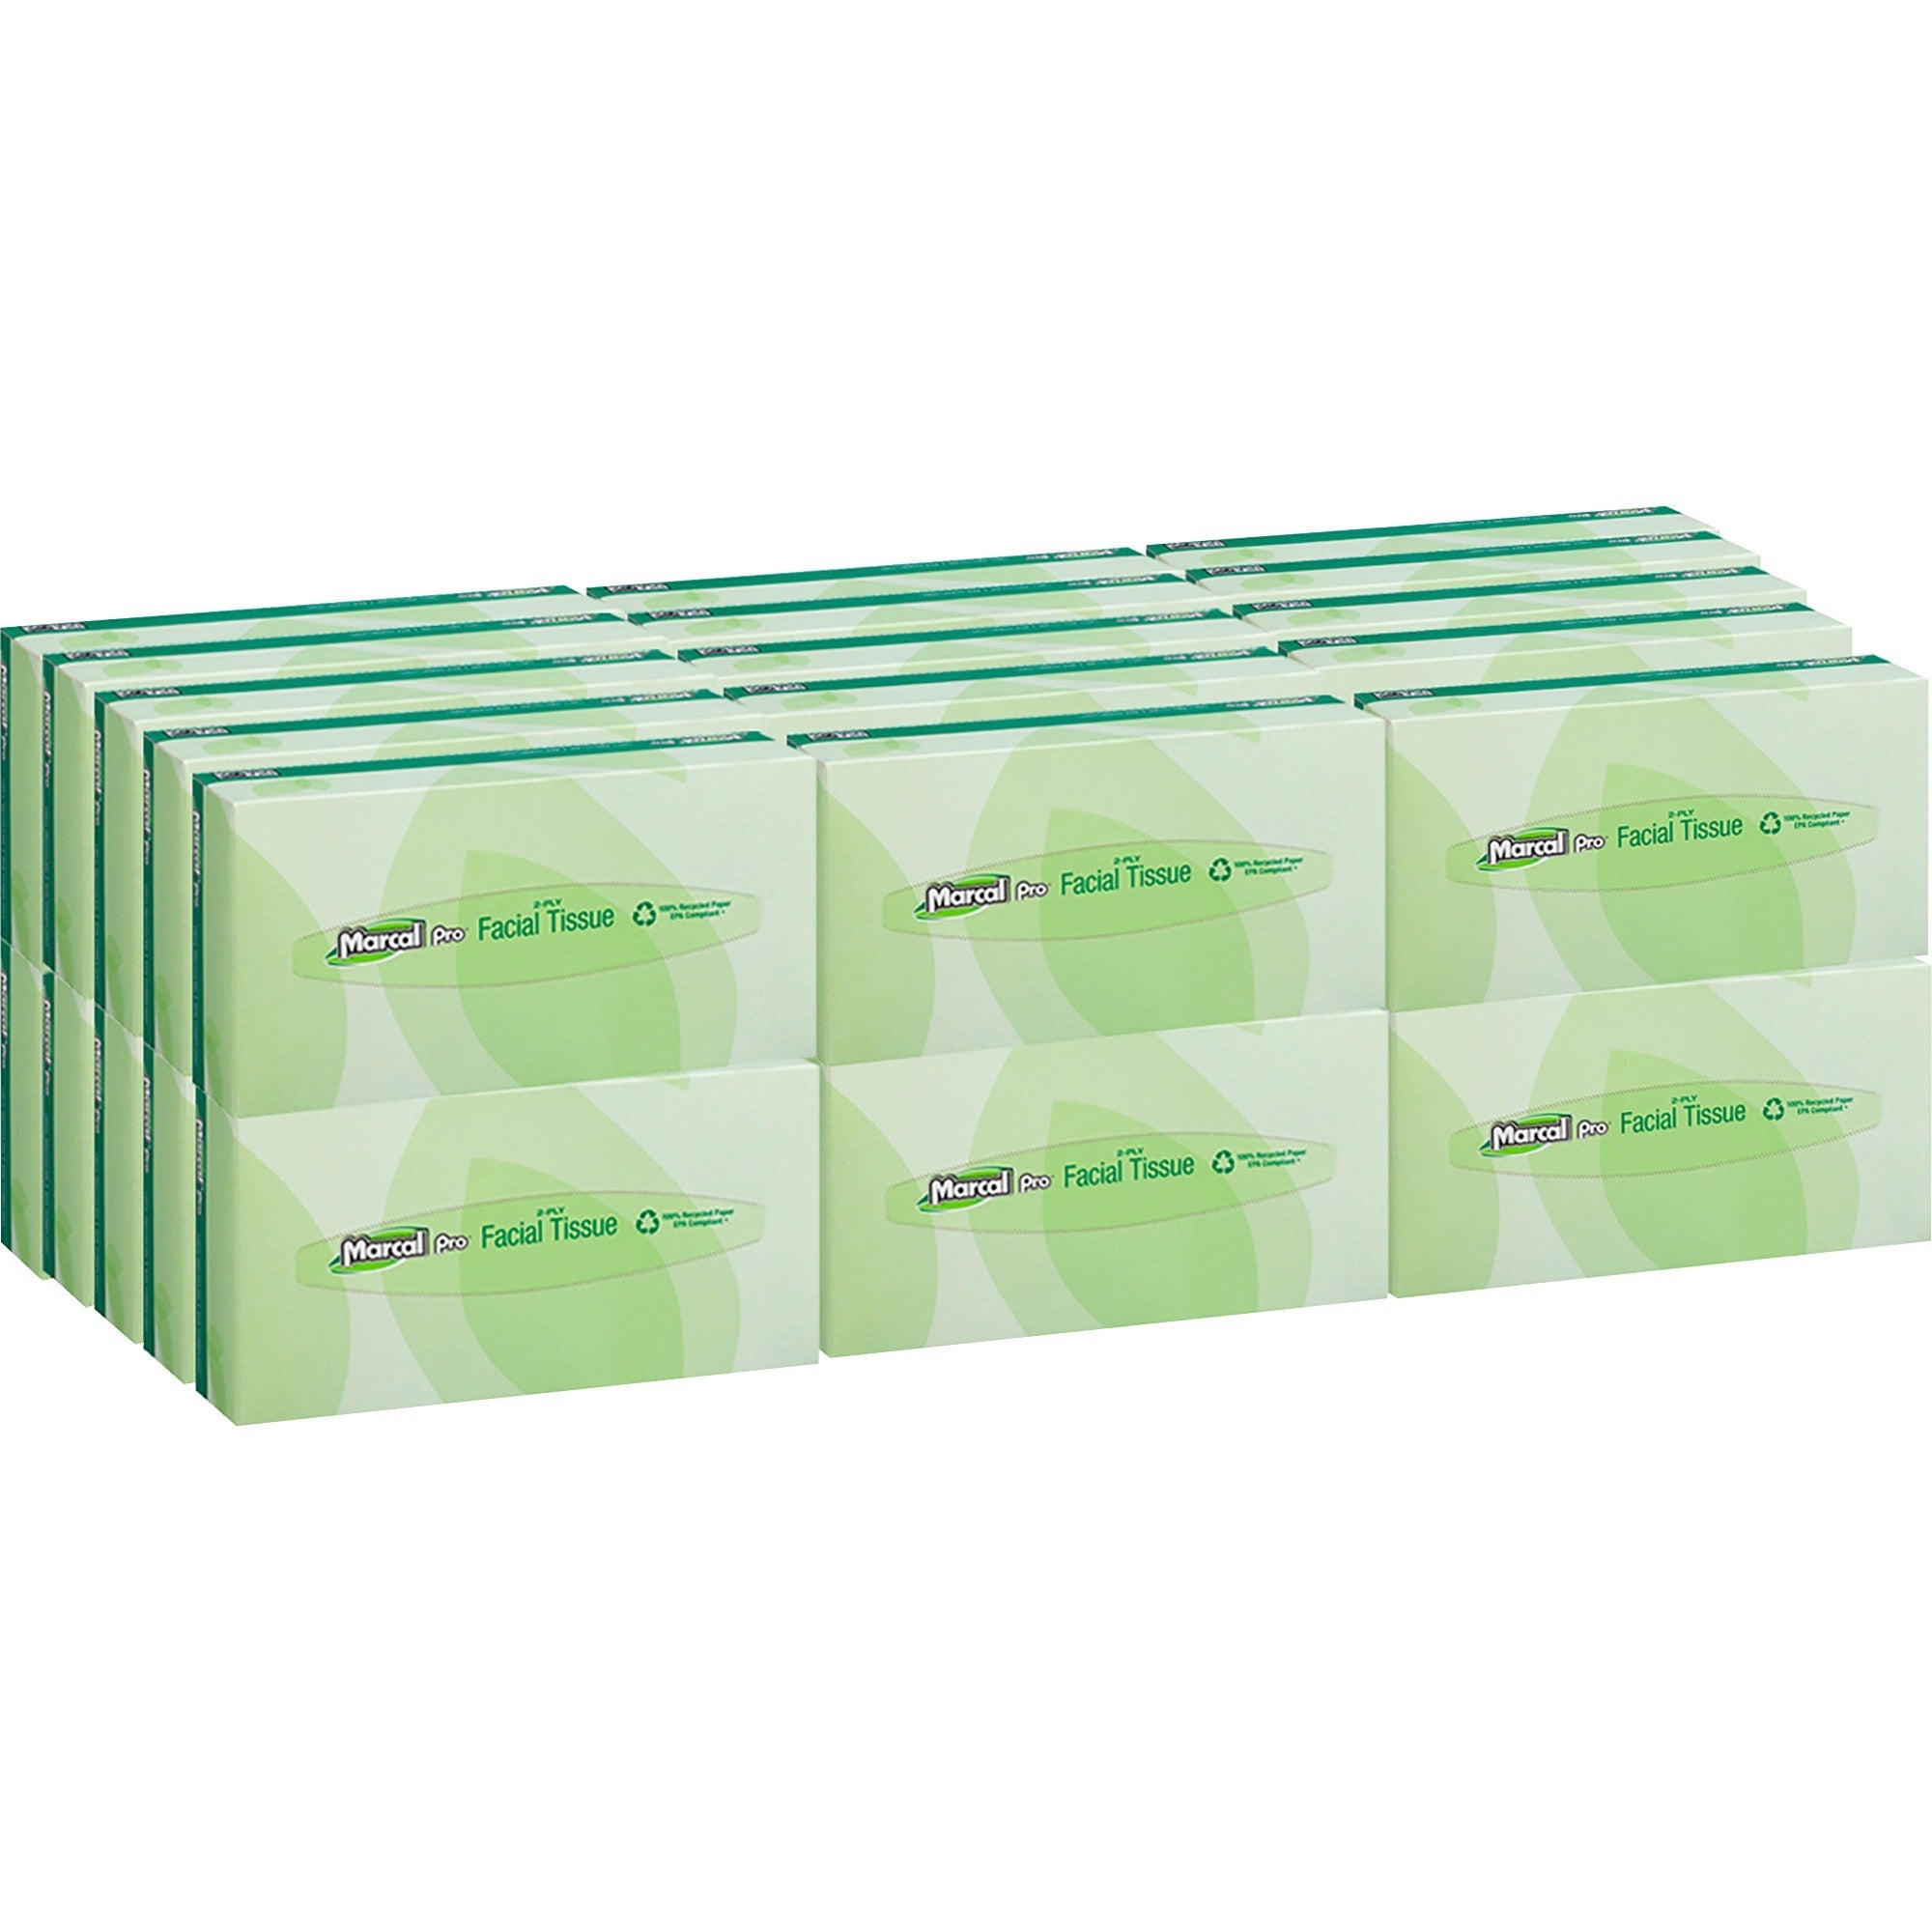 marcal-pro-facial-tissue-flat-box-2-ply-450-x-860-white-soft-absorbent-hypoallergenic-fragrance-free-dye-free-for-healthcare-office-100-per-box-30-carton_mrc2930ct - 1